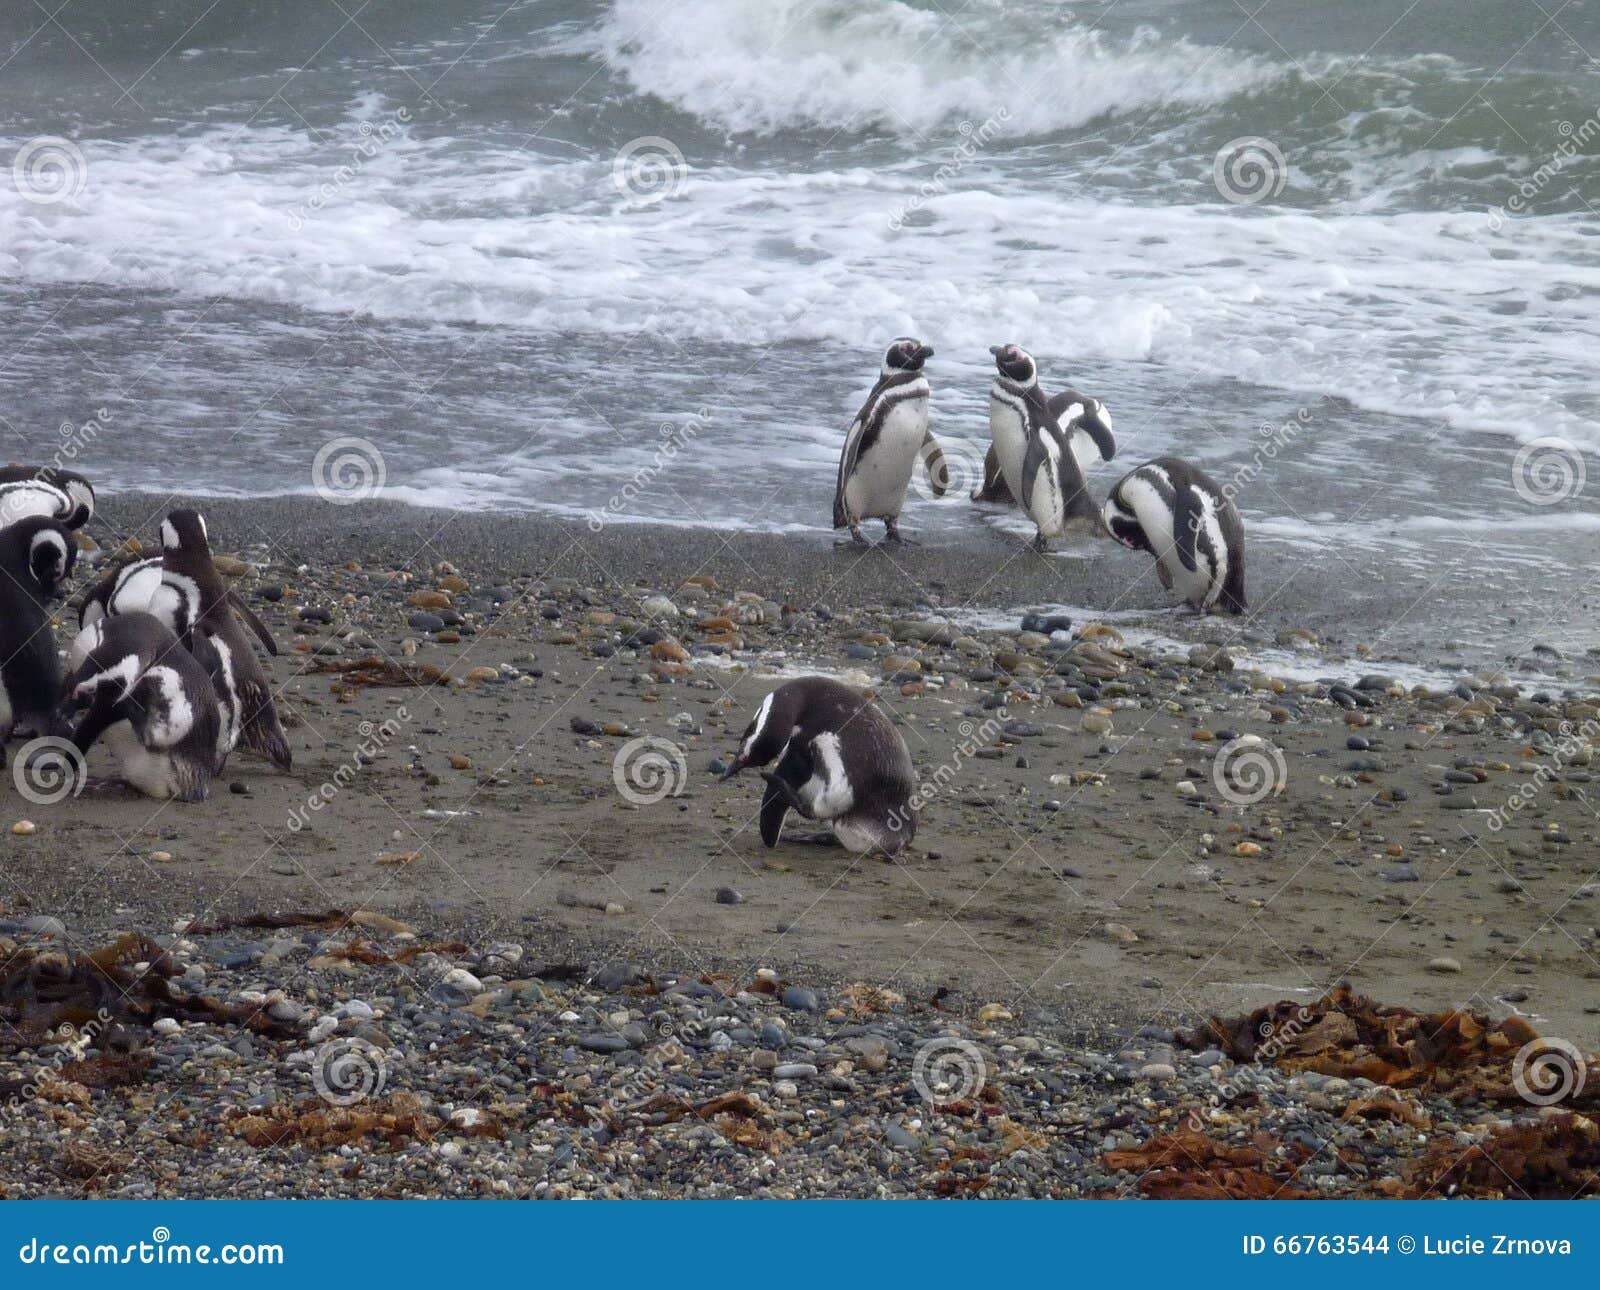 group of pinguins on a shore in seno otway reservation in chile